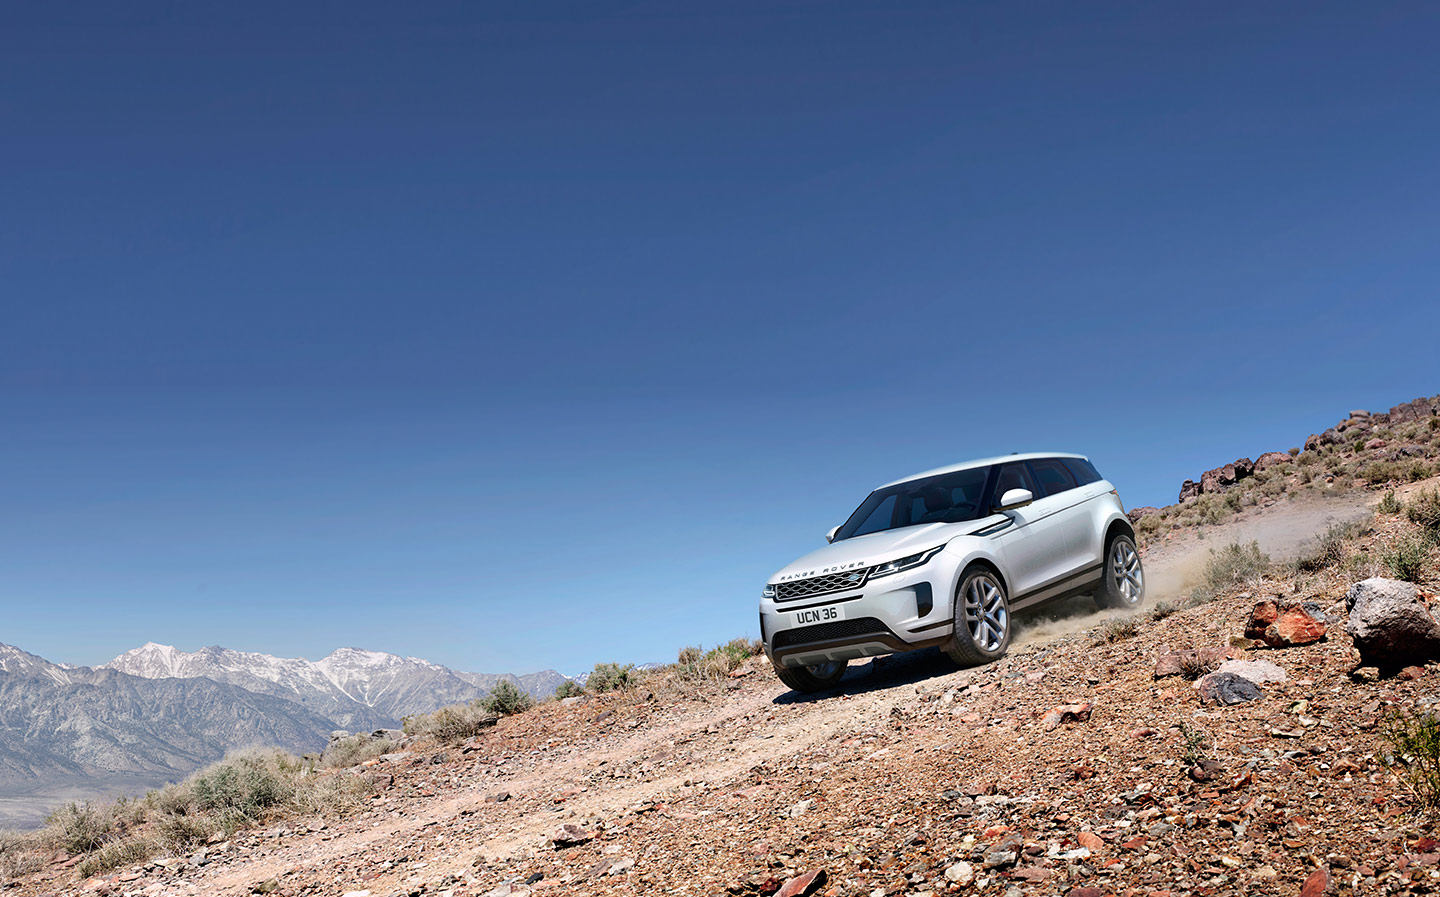 2019 Range Rover Evoque MY20 prices, release date, images, video, and info